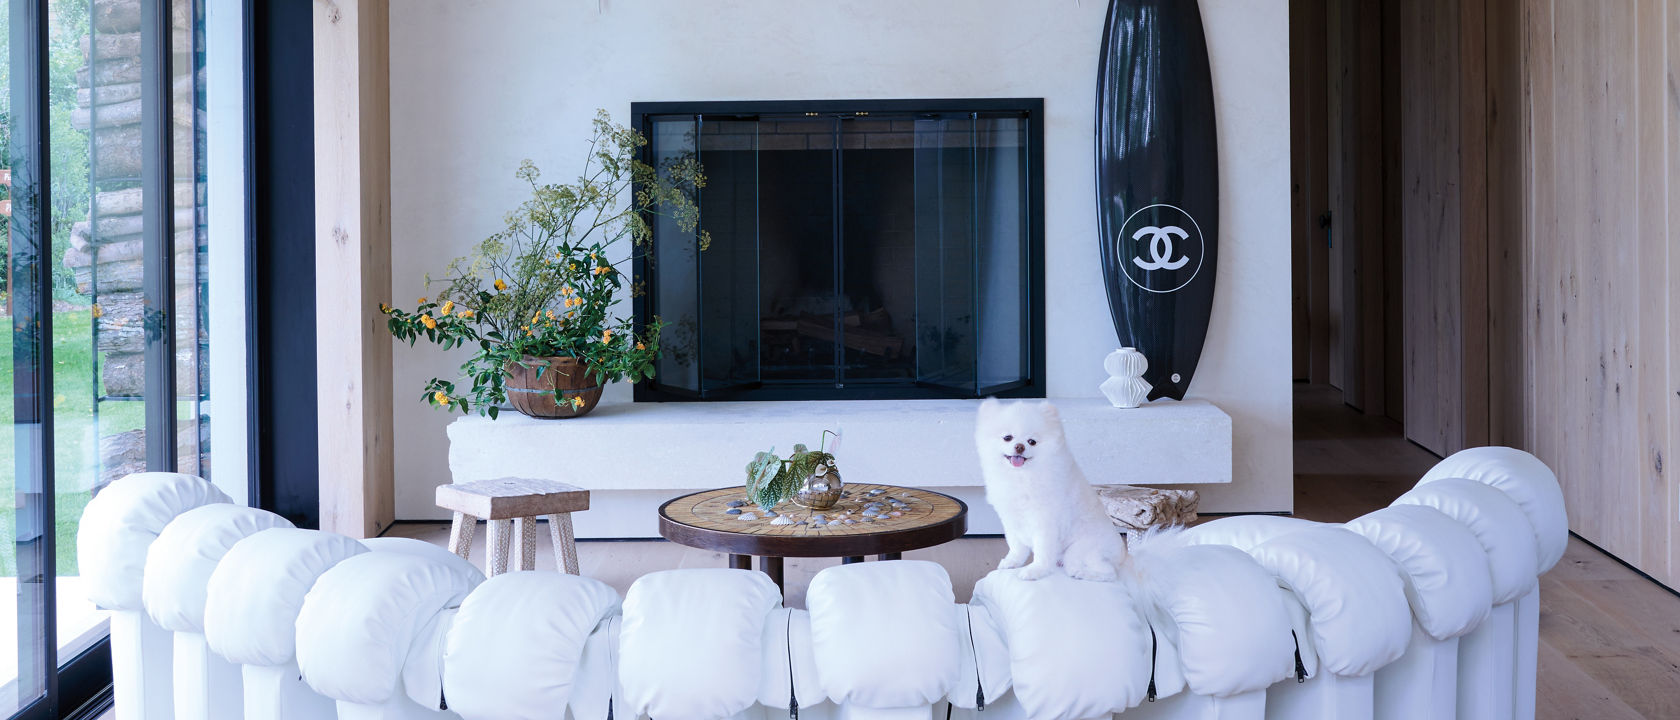 Sasha Bikoff's living room with a couch, fireplace, table and two dogs.